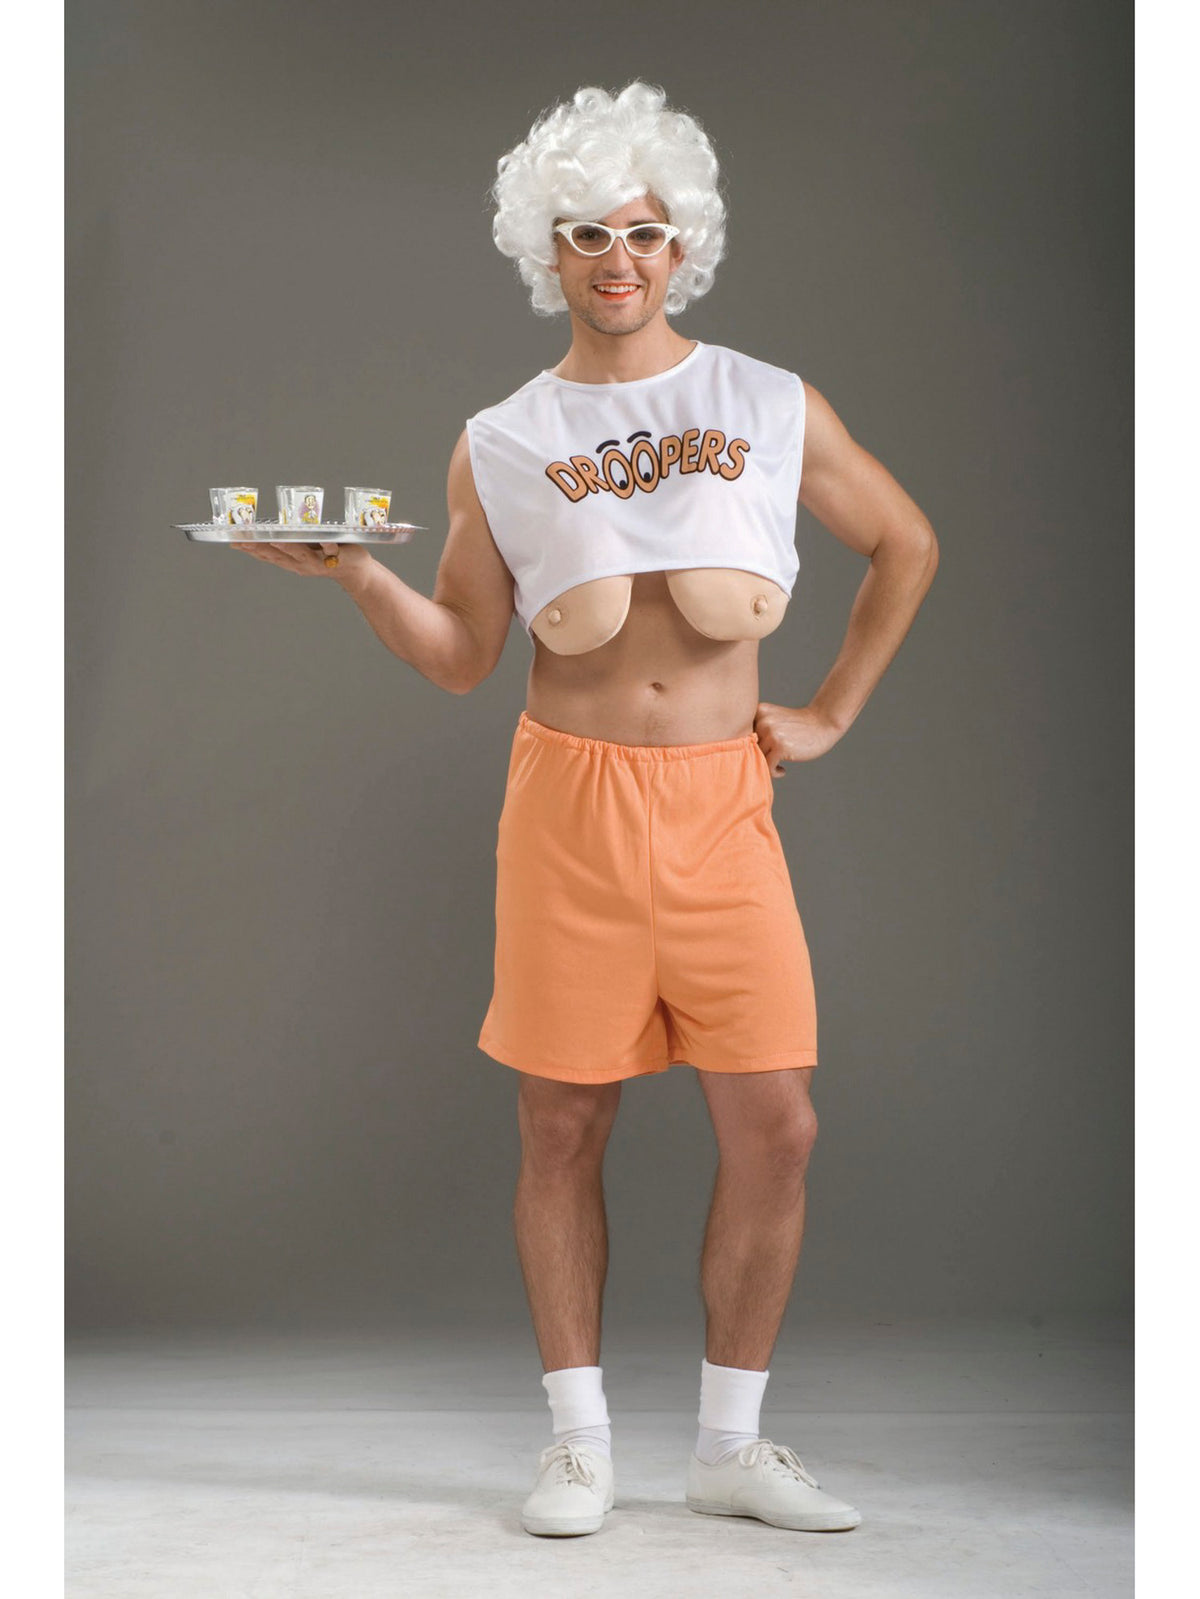 Droopers Boobs Adult Costume